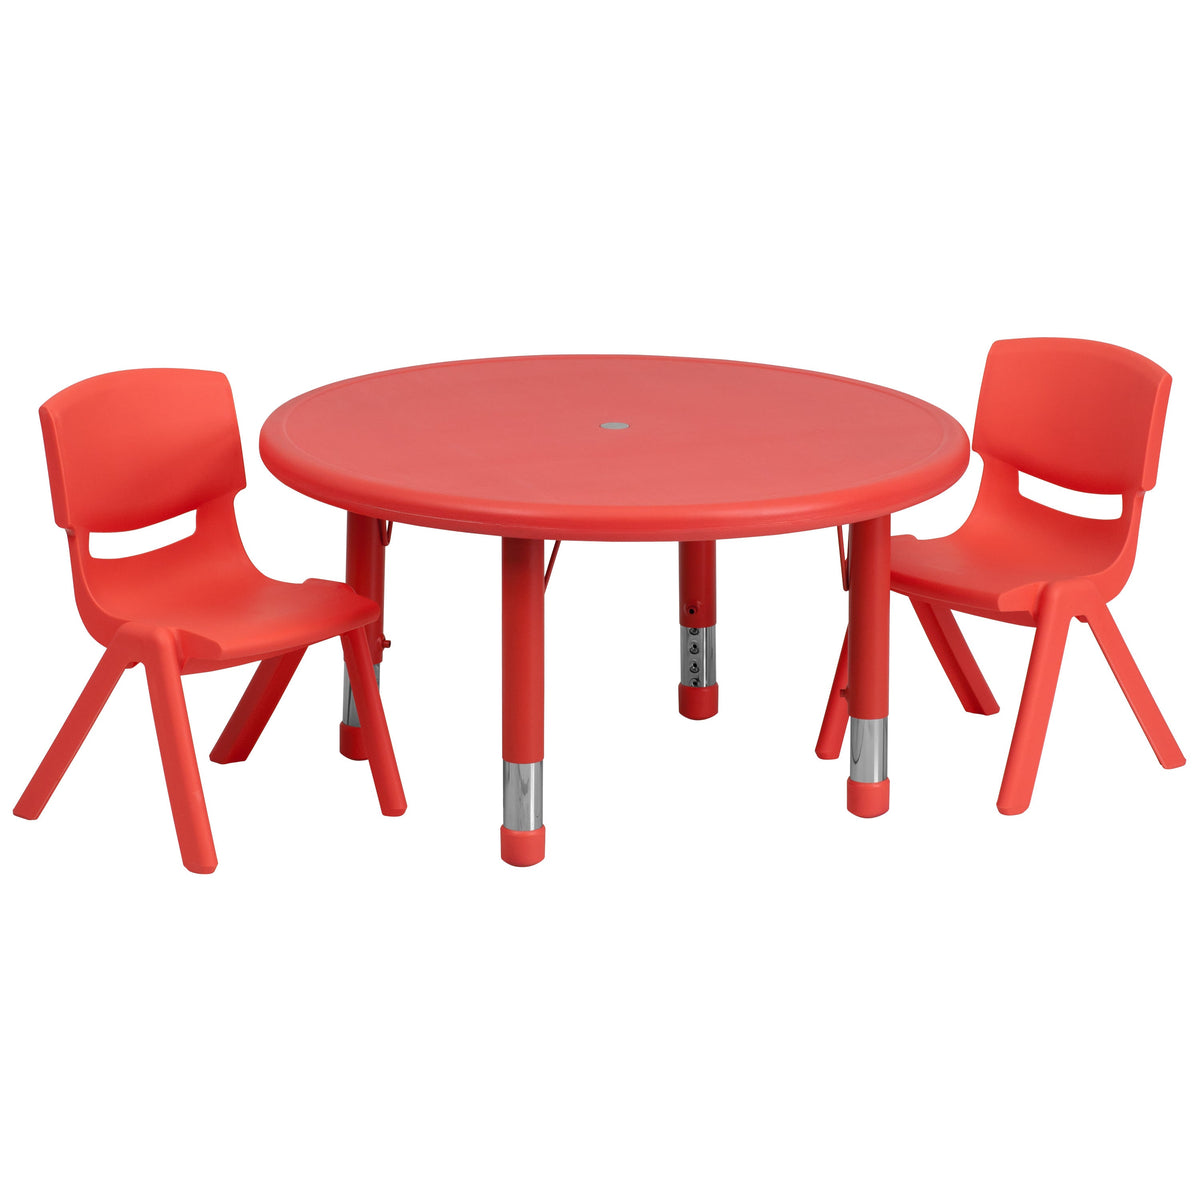 Red |#| 33inch Round Red Plastic Height Adjustable Activity Table Set with 2 Chairs